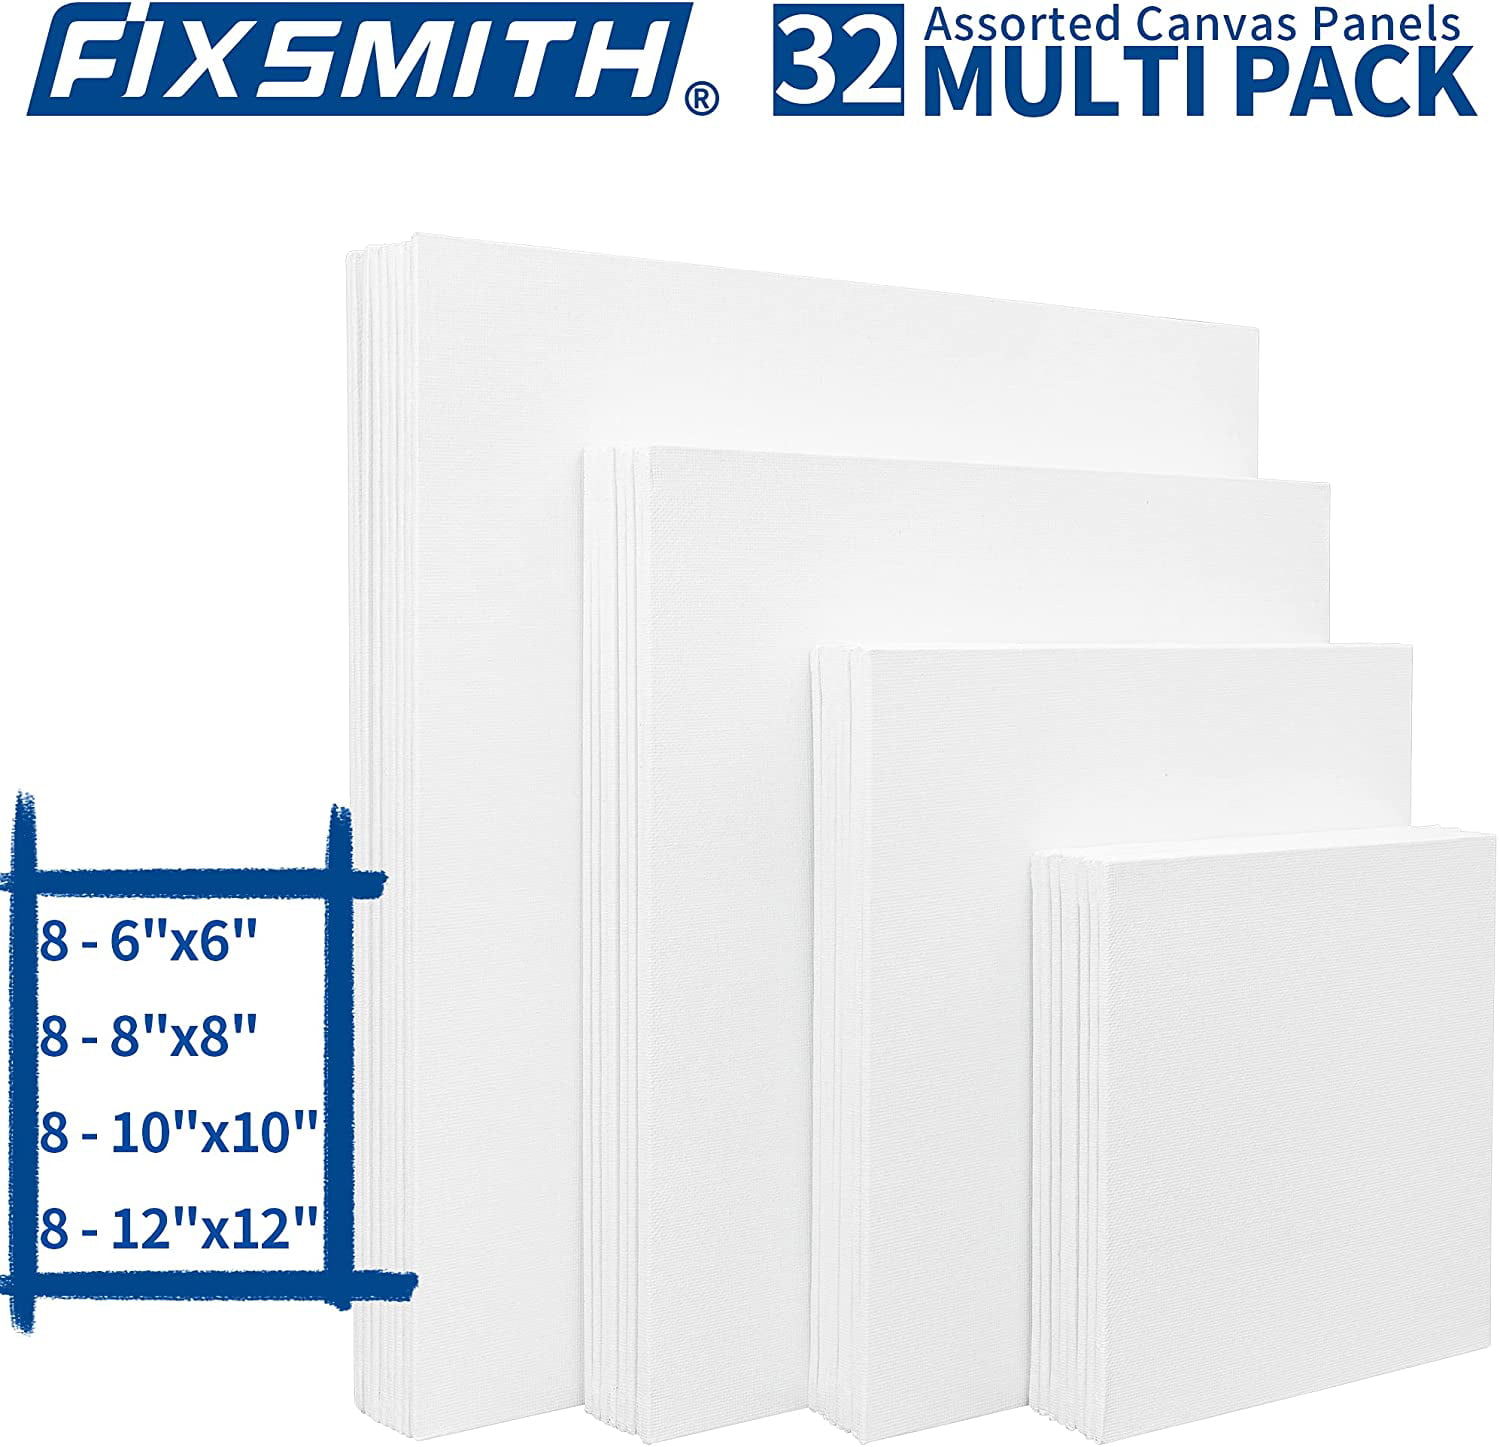 FIXSMITH Painting Canvas Panels - 8x8 Inch Canvas Panel Super Value 12 Pack  Canvases,100% Cotton,Square Canvas Board,Acid Free,Artist Canvas Boards